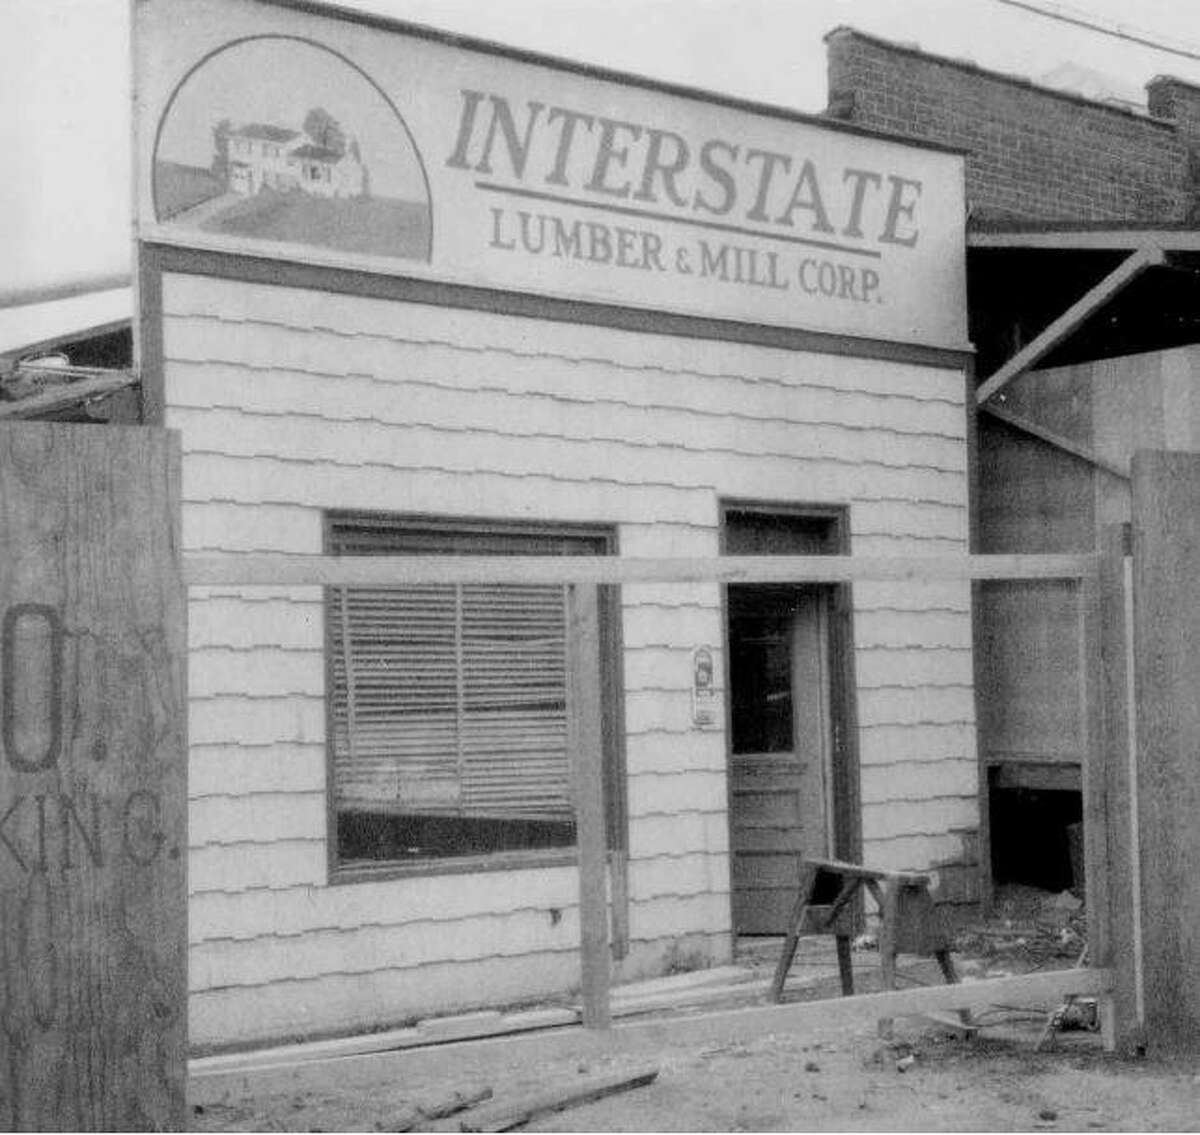 The Interstate Lumber and Mill Corp. was founded in 1922 in the Byram section of Greenwich.